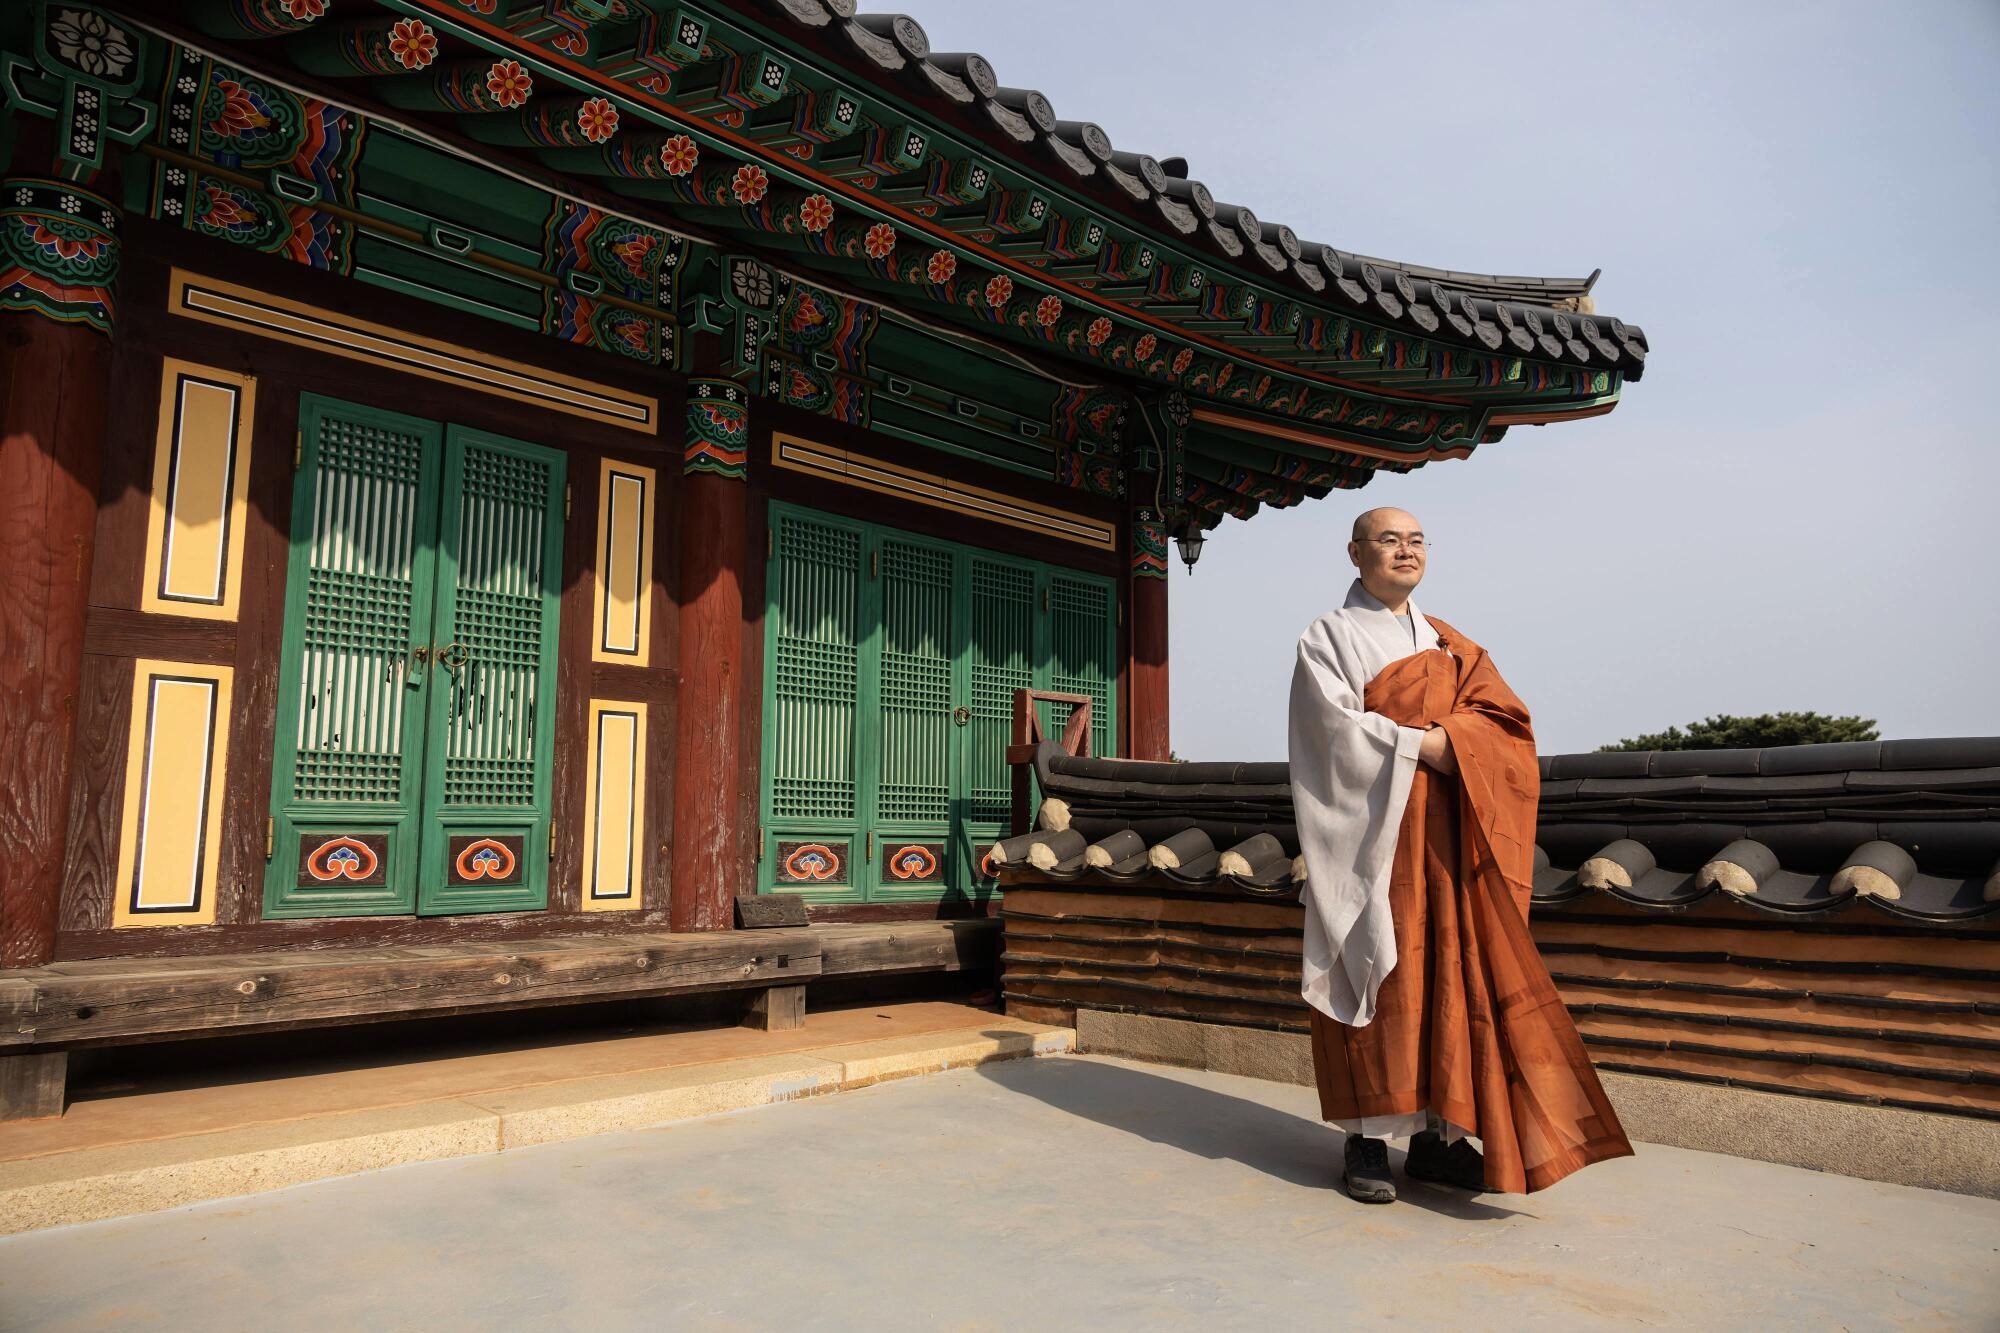 A man in white and brown monk's robes stands in front of a temple with green and brown panels 